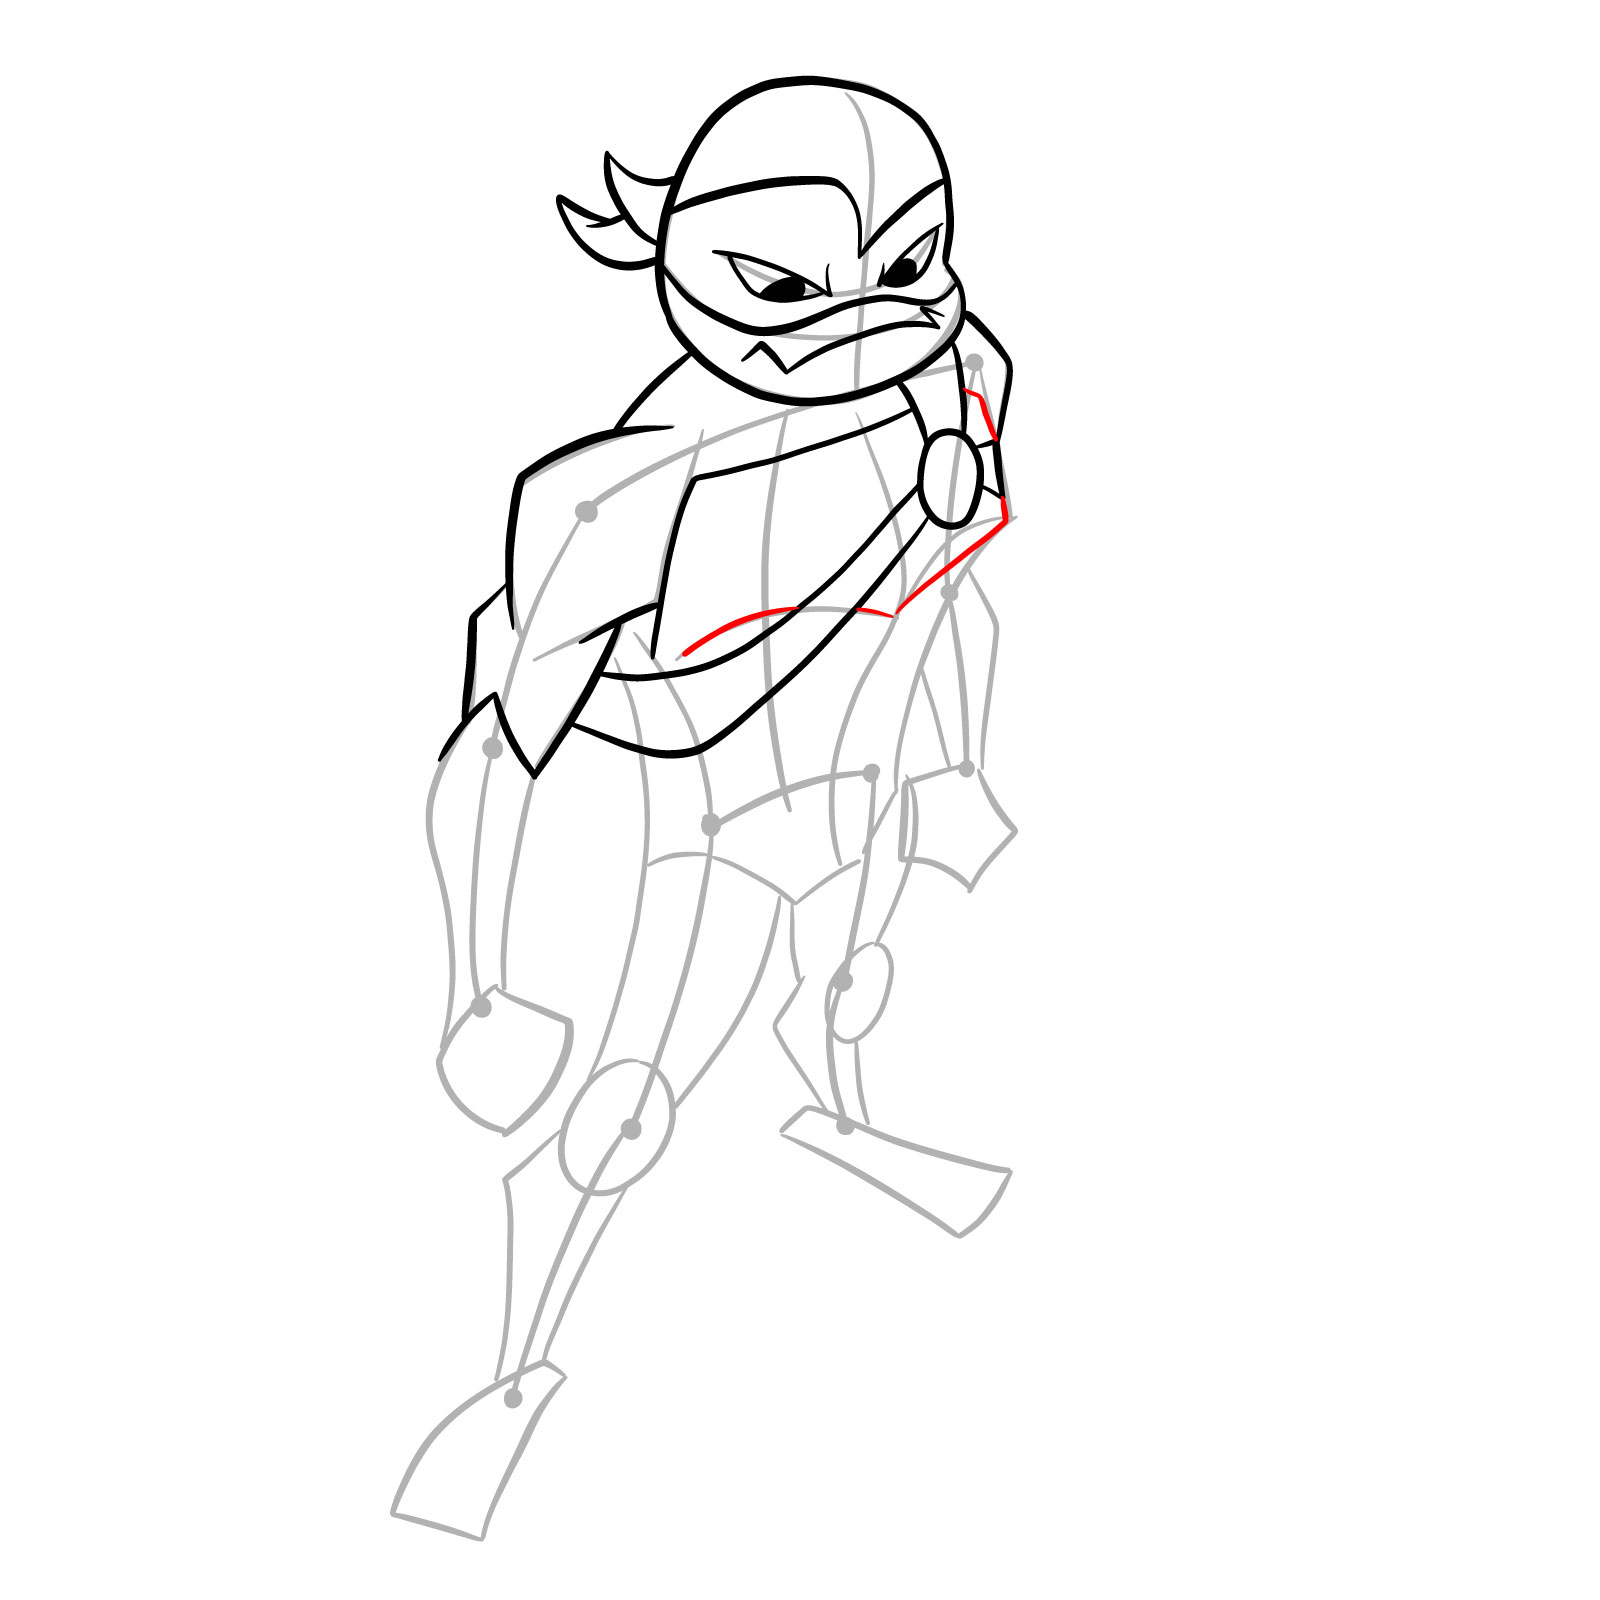 How to draw Mikey in Hamato Ninpō state - step 13